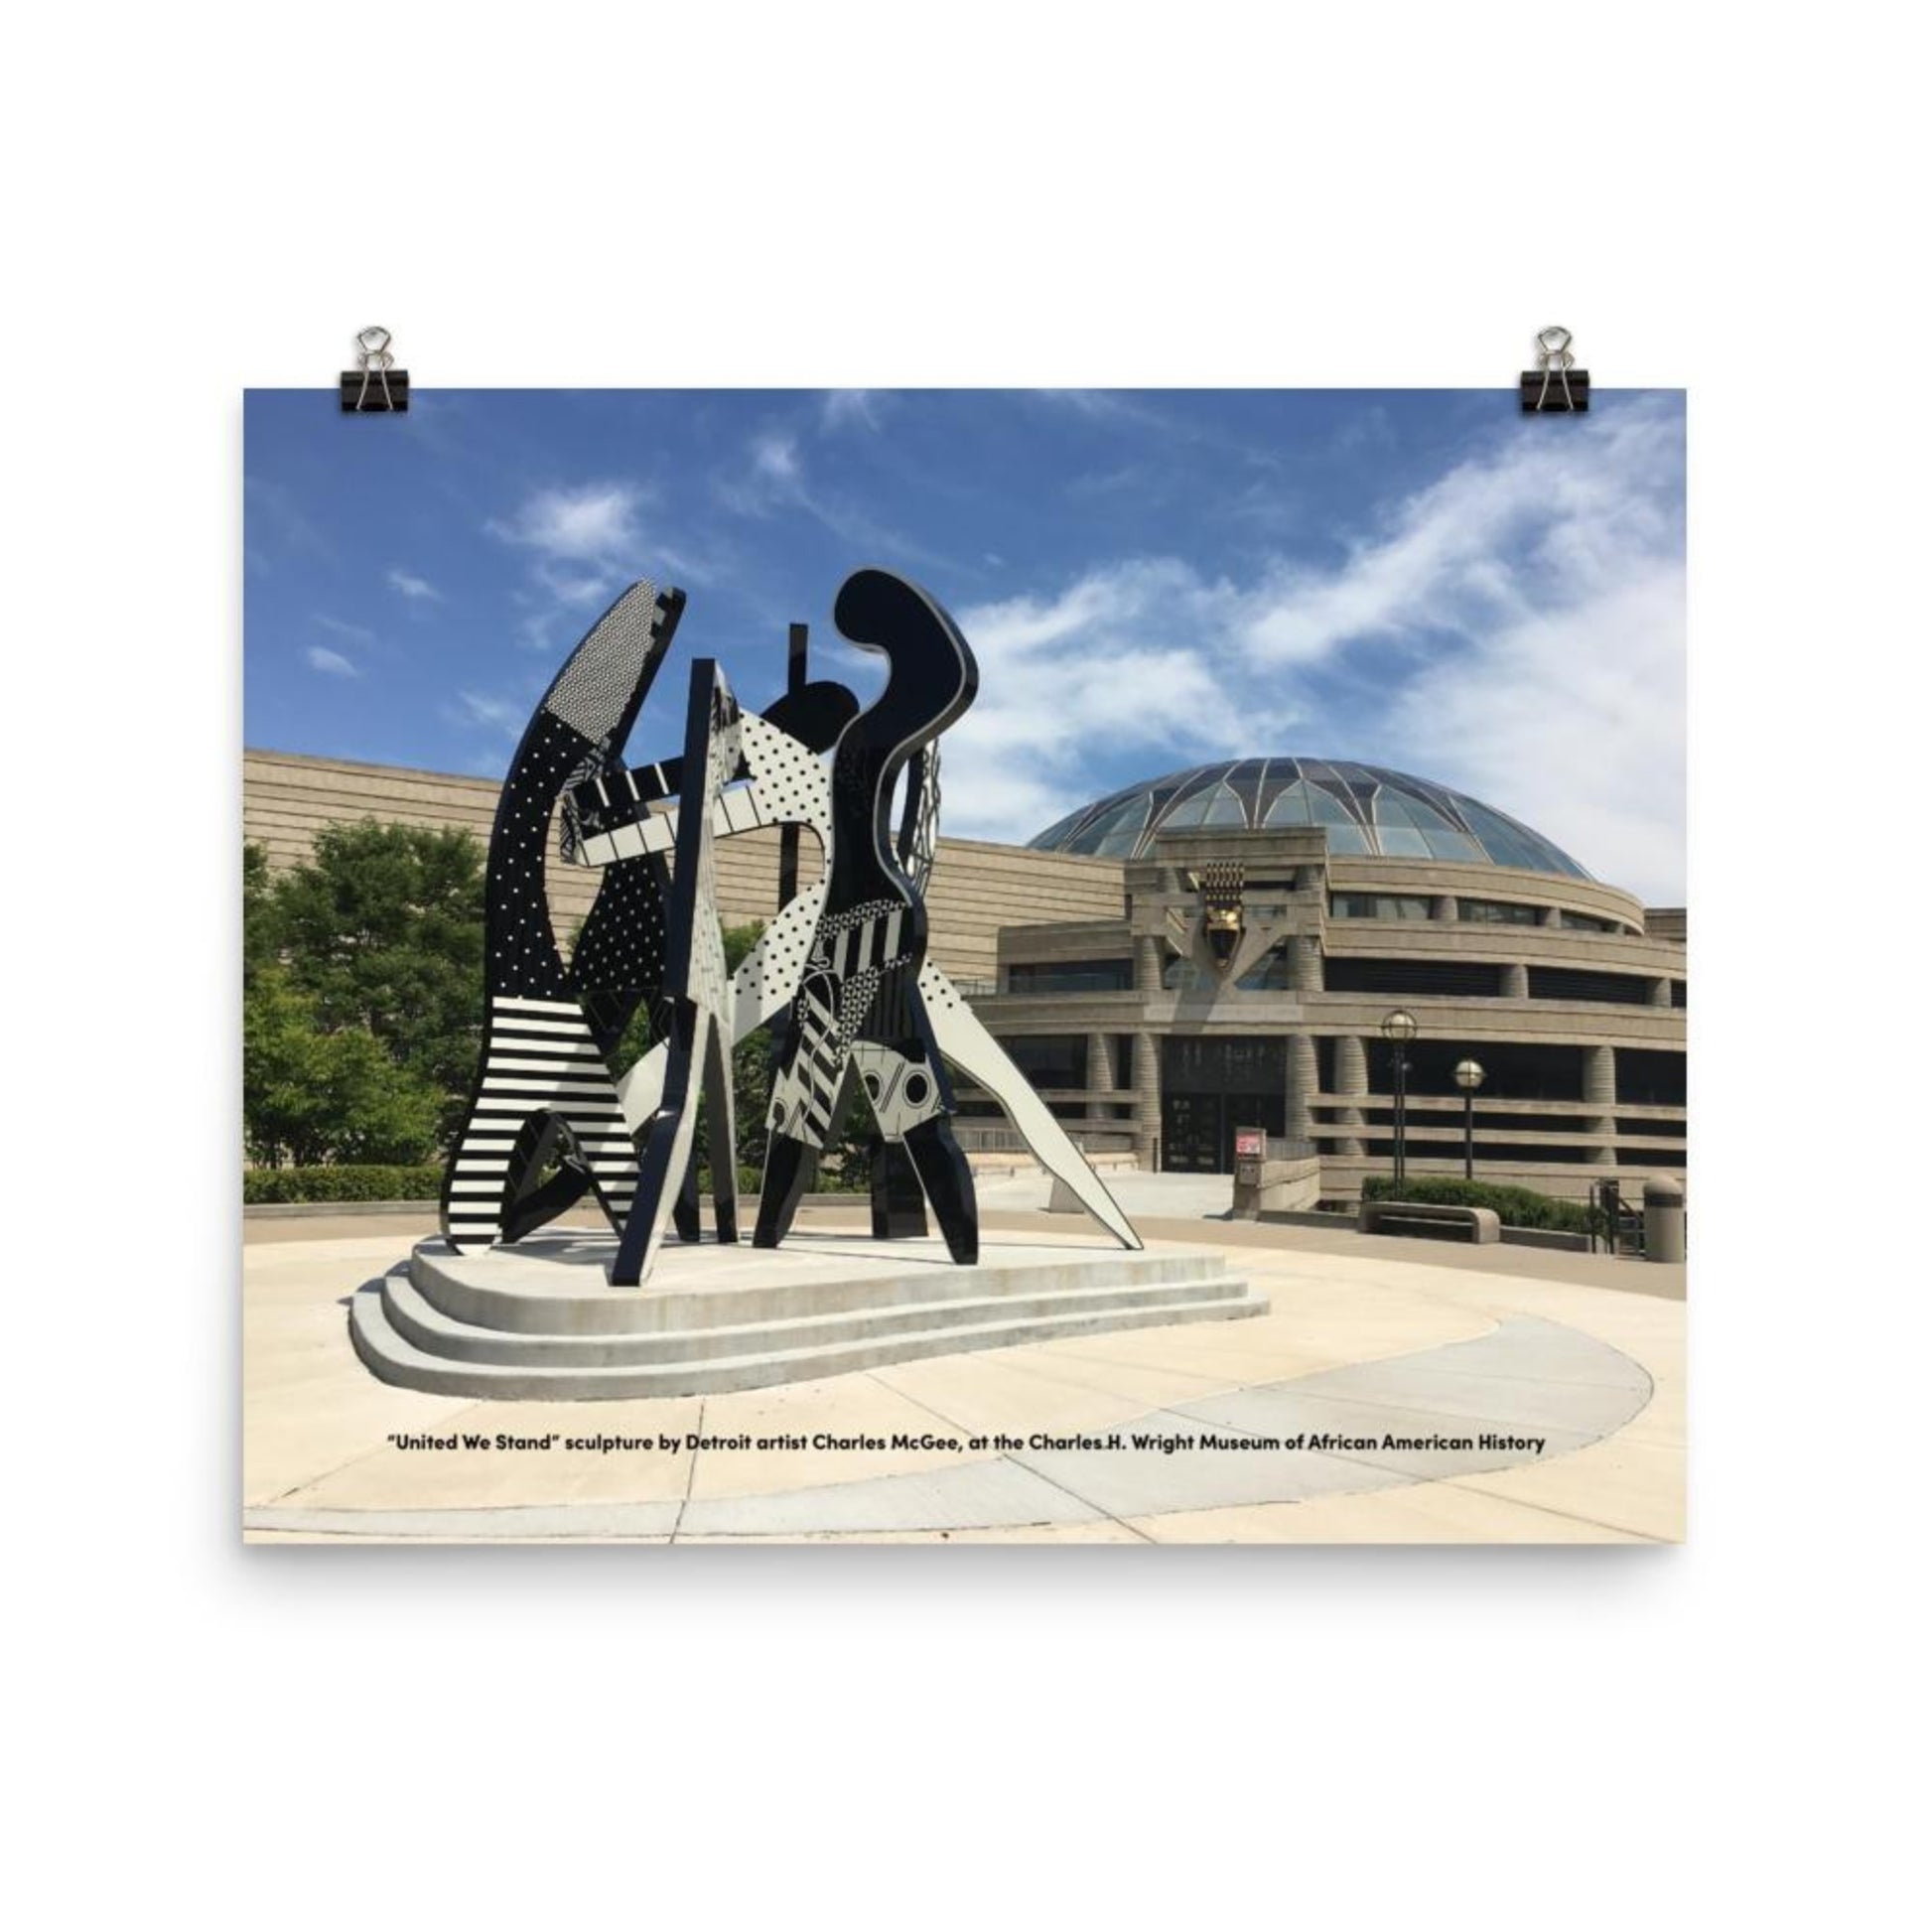 16 inch by 20 inch poster with United We Stand sculpture in front of Charles H. Wright Museum of African American History